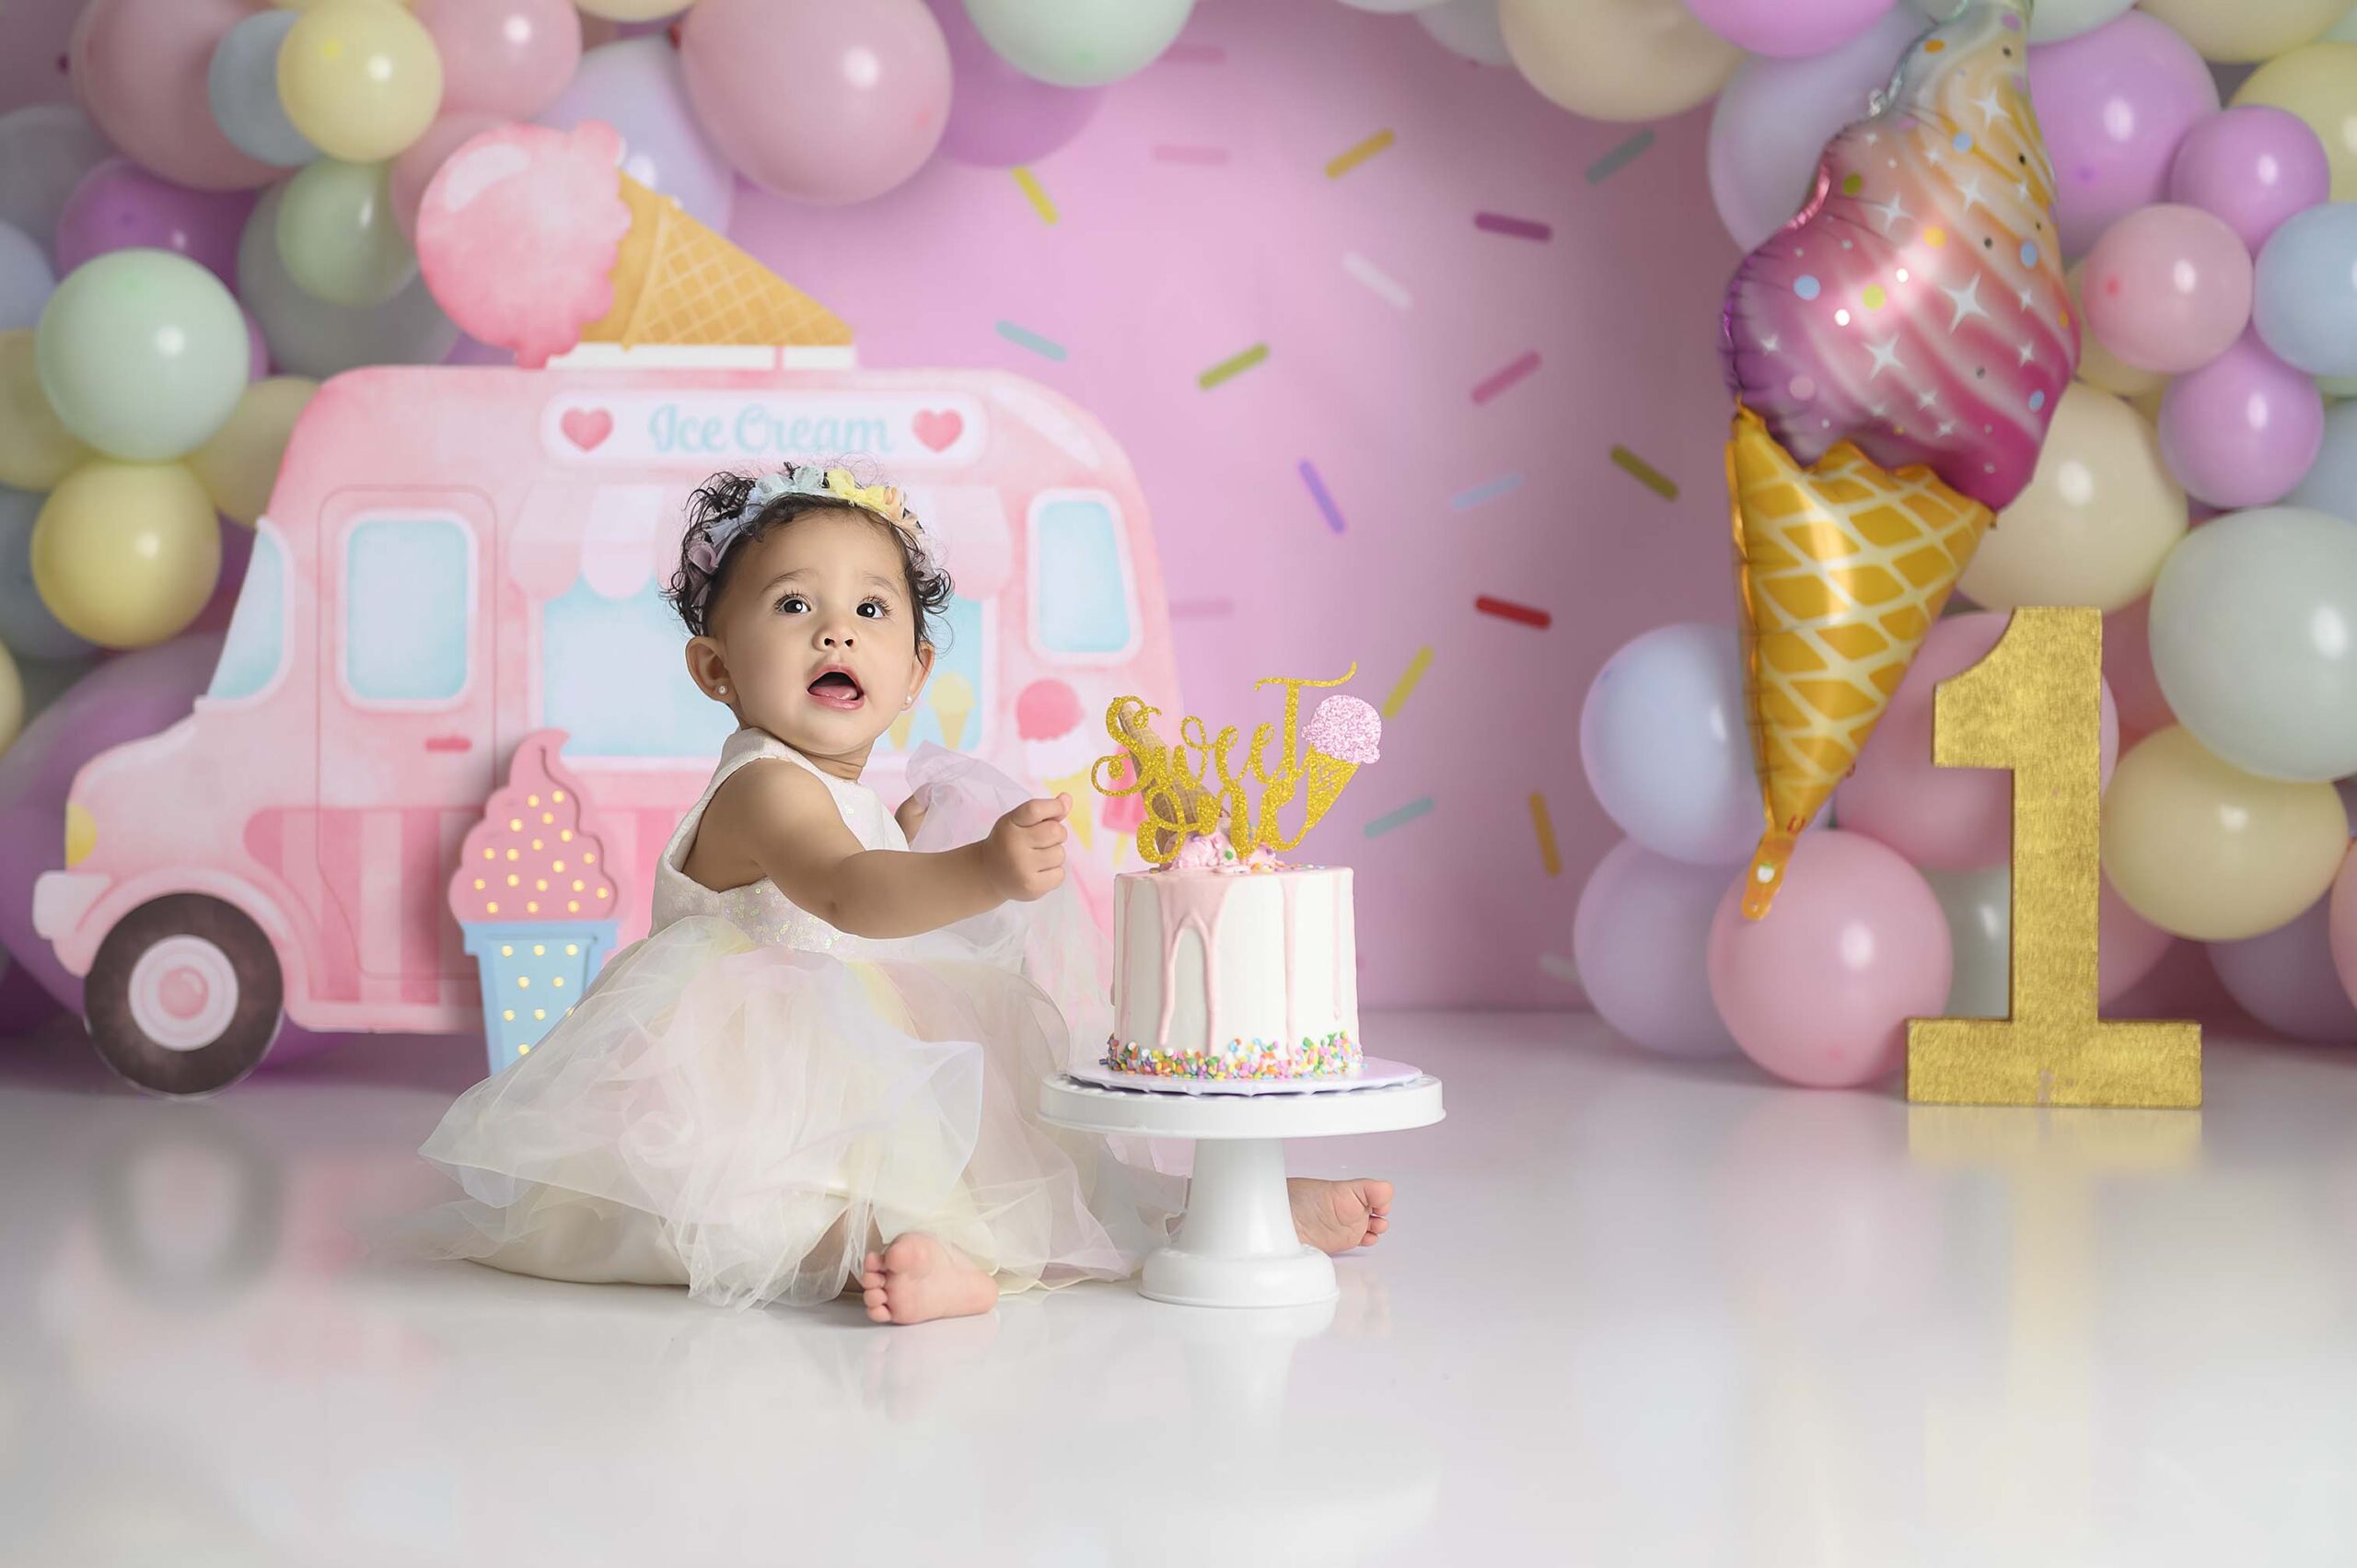 Roanoake-Trophy-Club-Southlake-cake-smash-photography-first-birthday-one-year-old-girlice-cream-pink-truck-rainbow